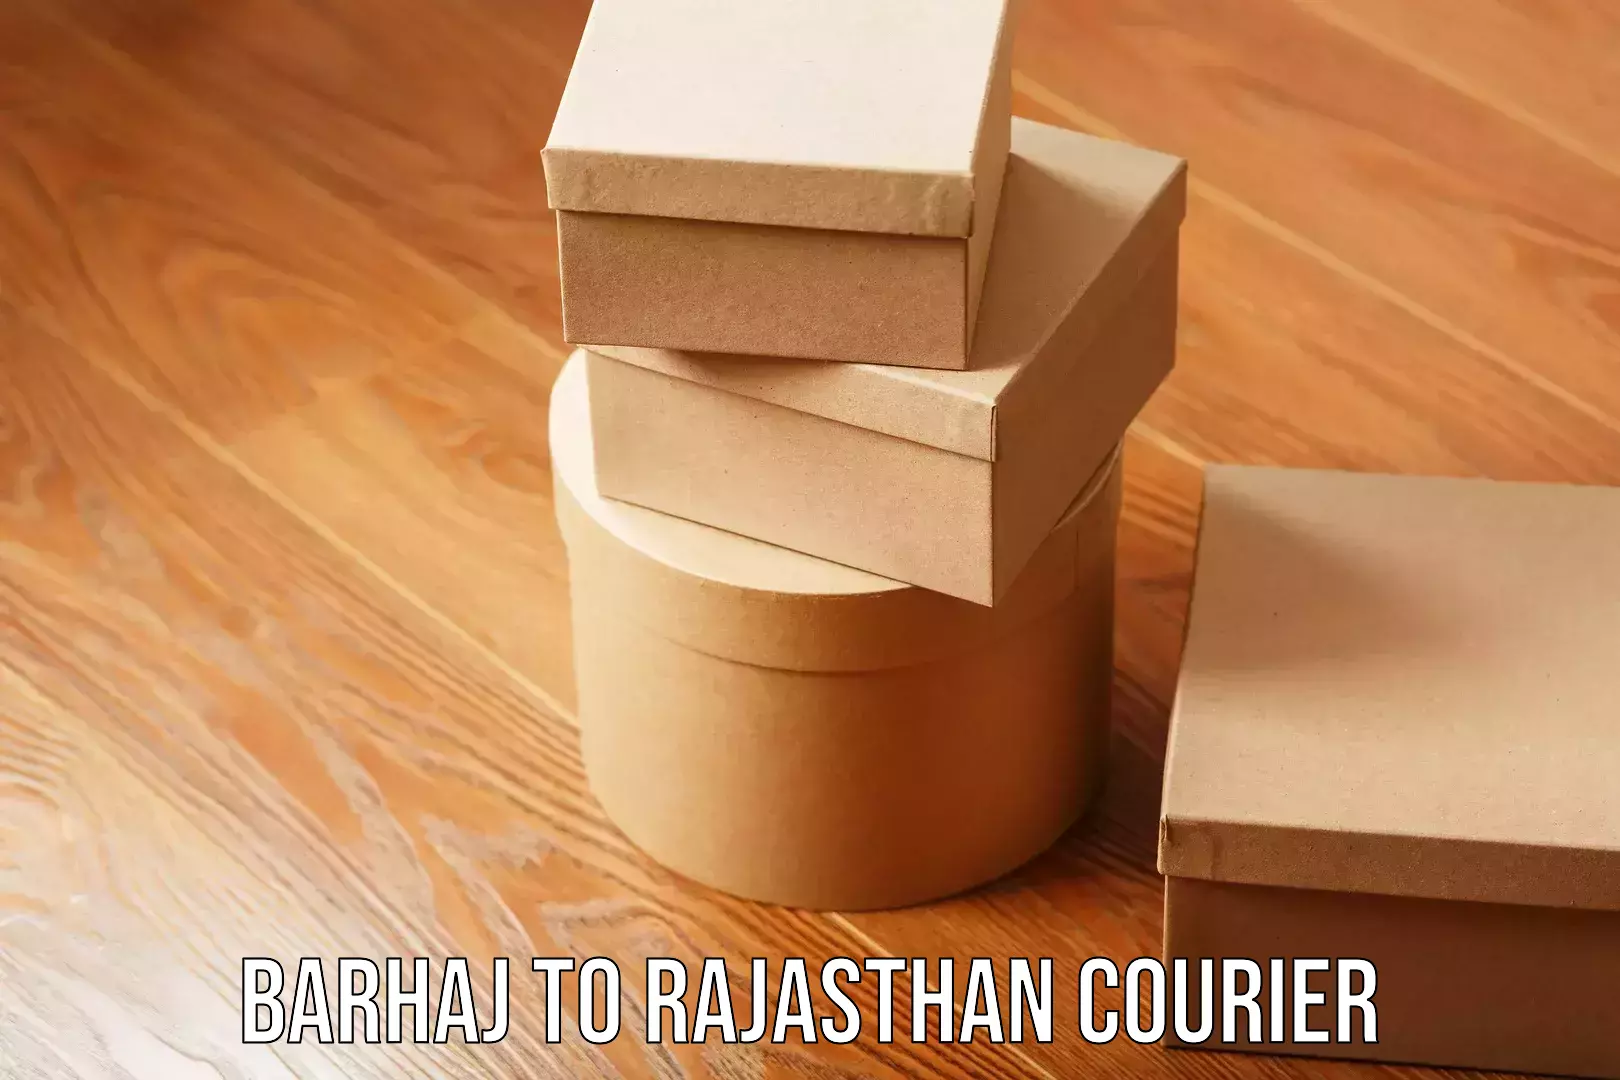 Efficient courier operations Barhaj to Rajasthan